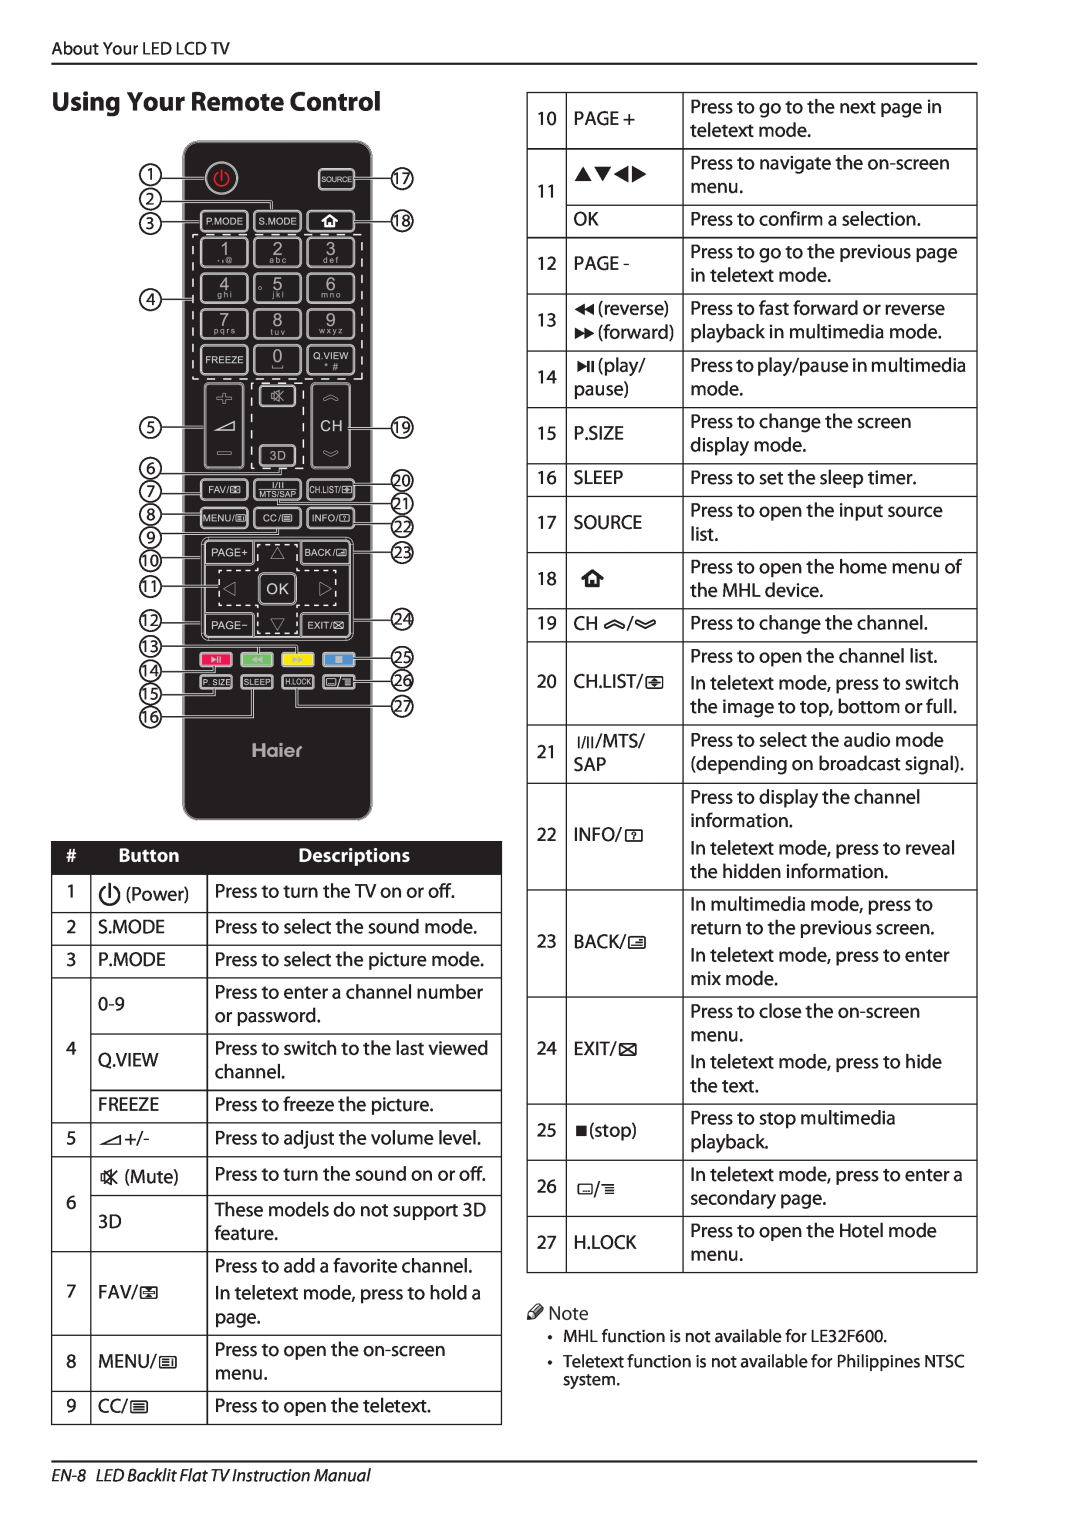 Haier LE32A650, LE32F600 owner manual Using Your Remote Control, Stwx 